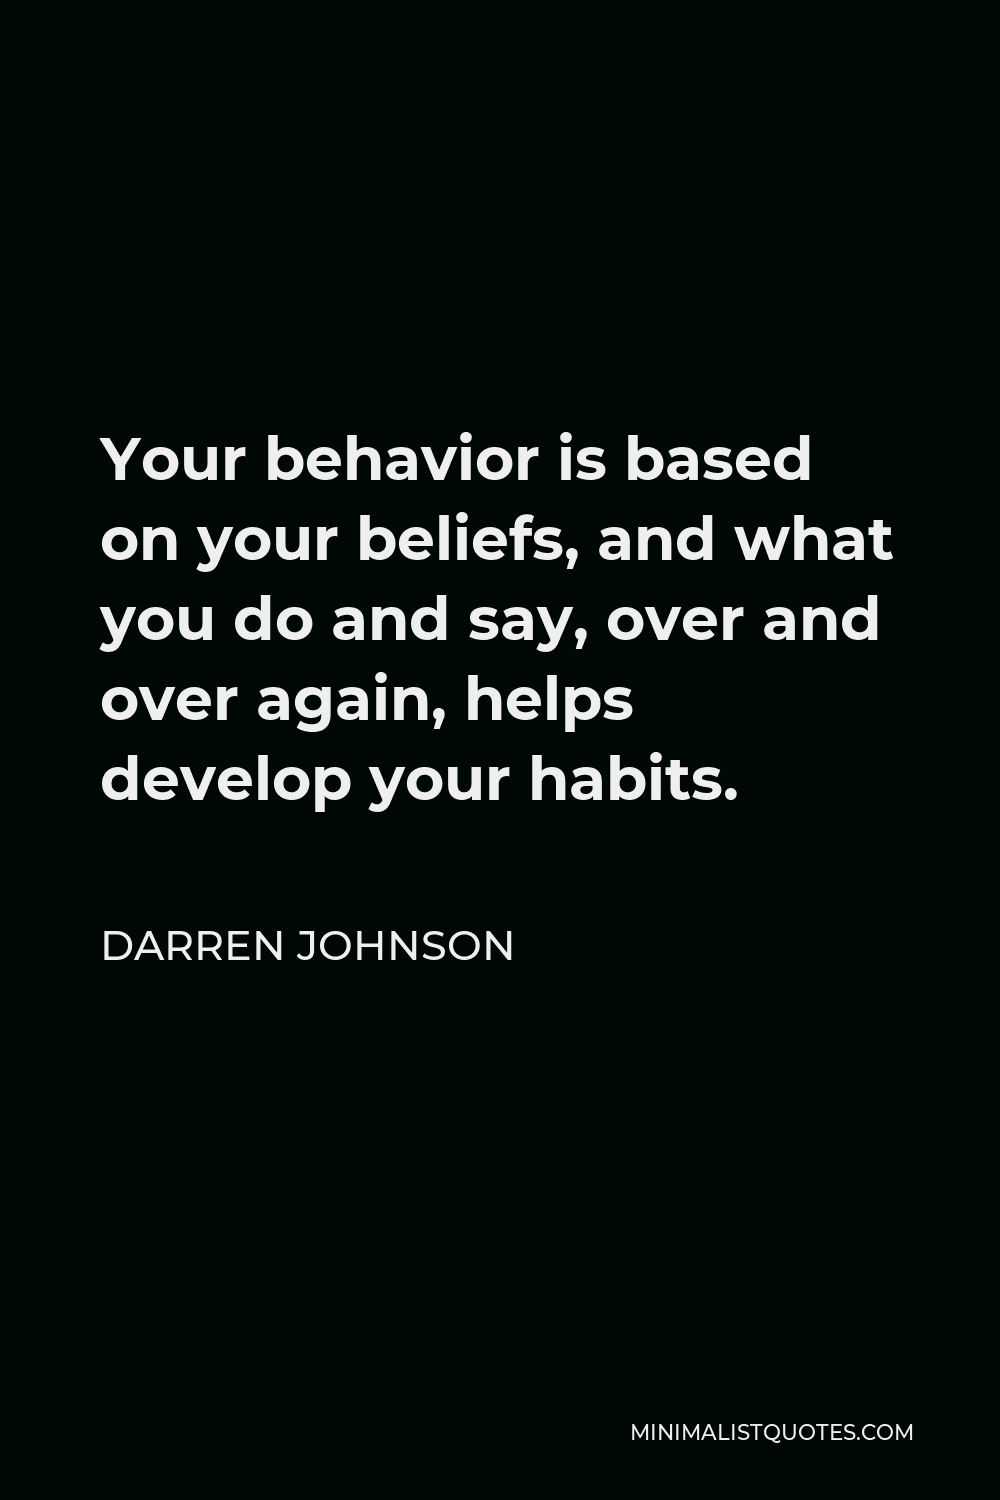 Darren Johnson Quote - Your behavior is based on your beliefs, and what you do and say, over and over again, helps develop your habits.